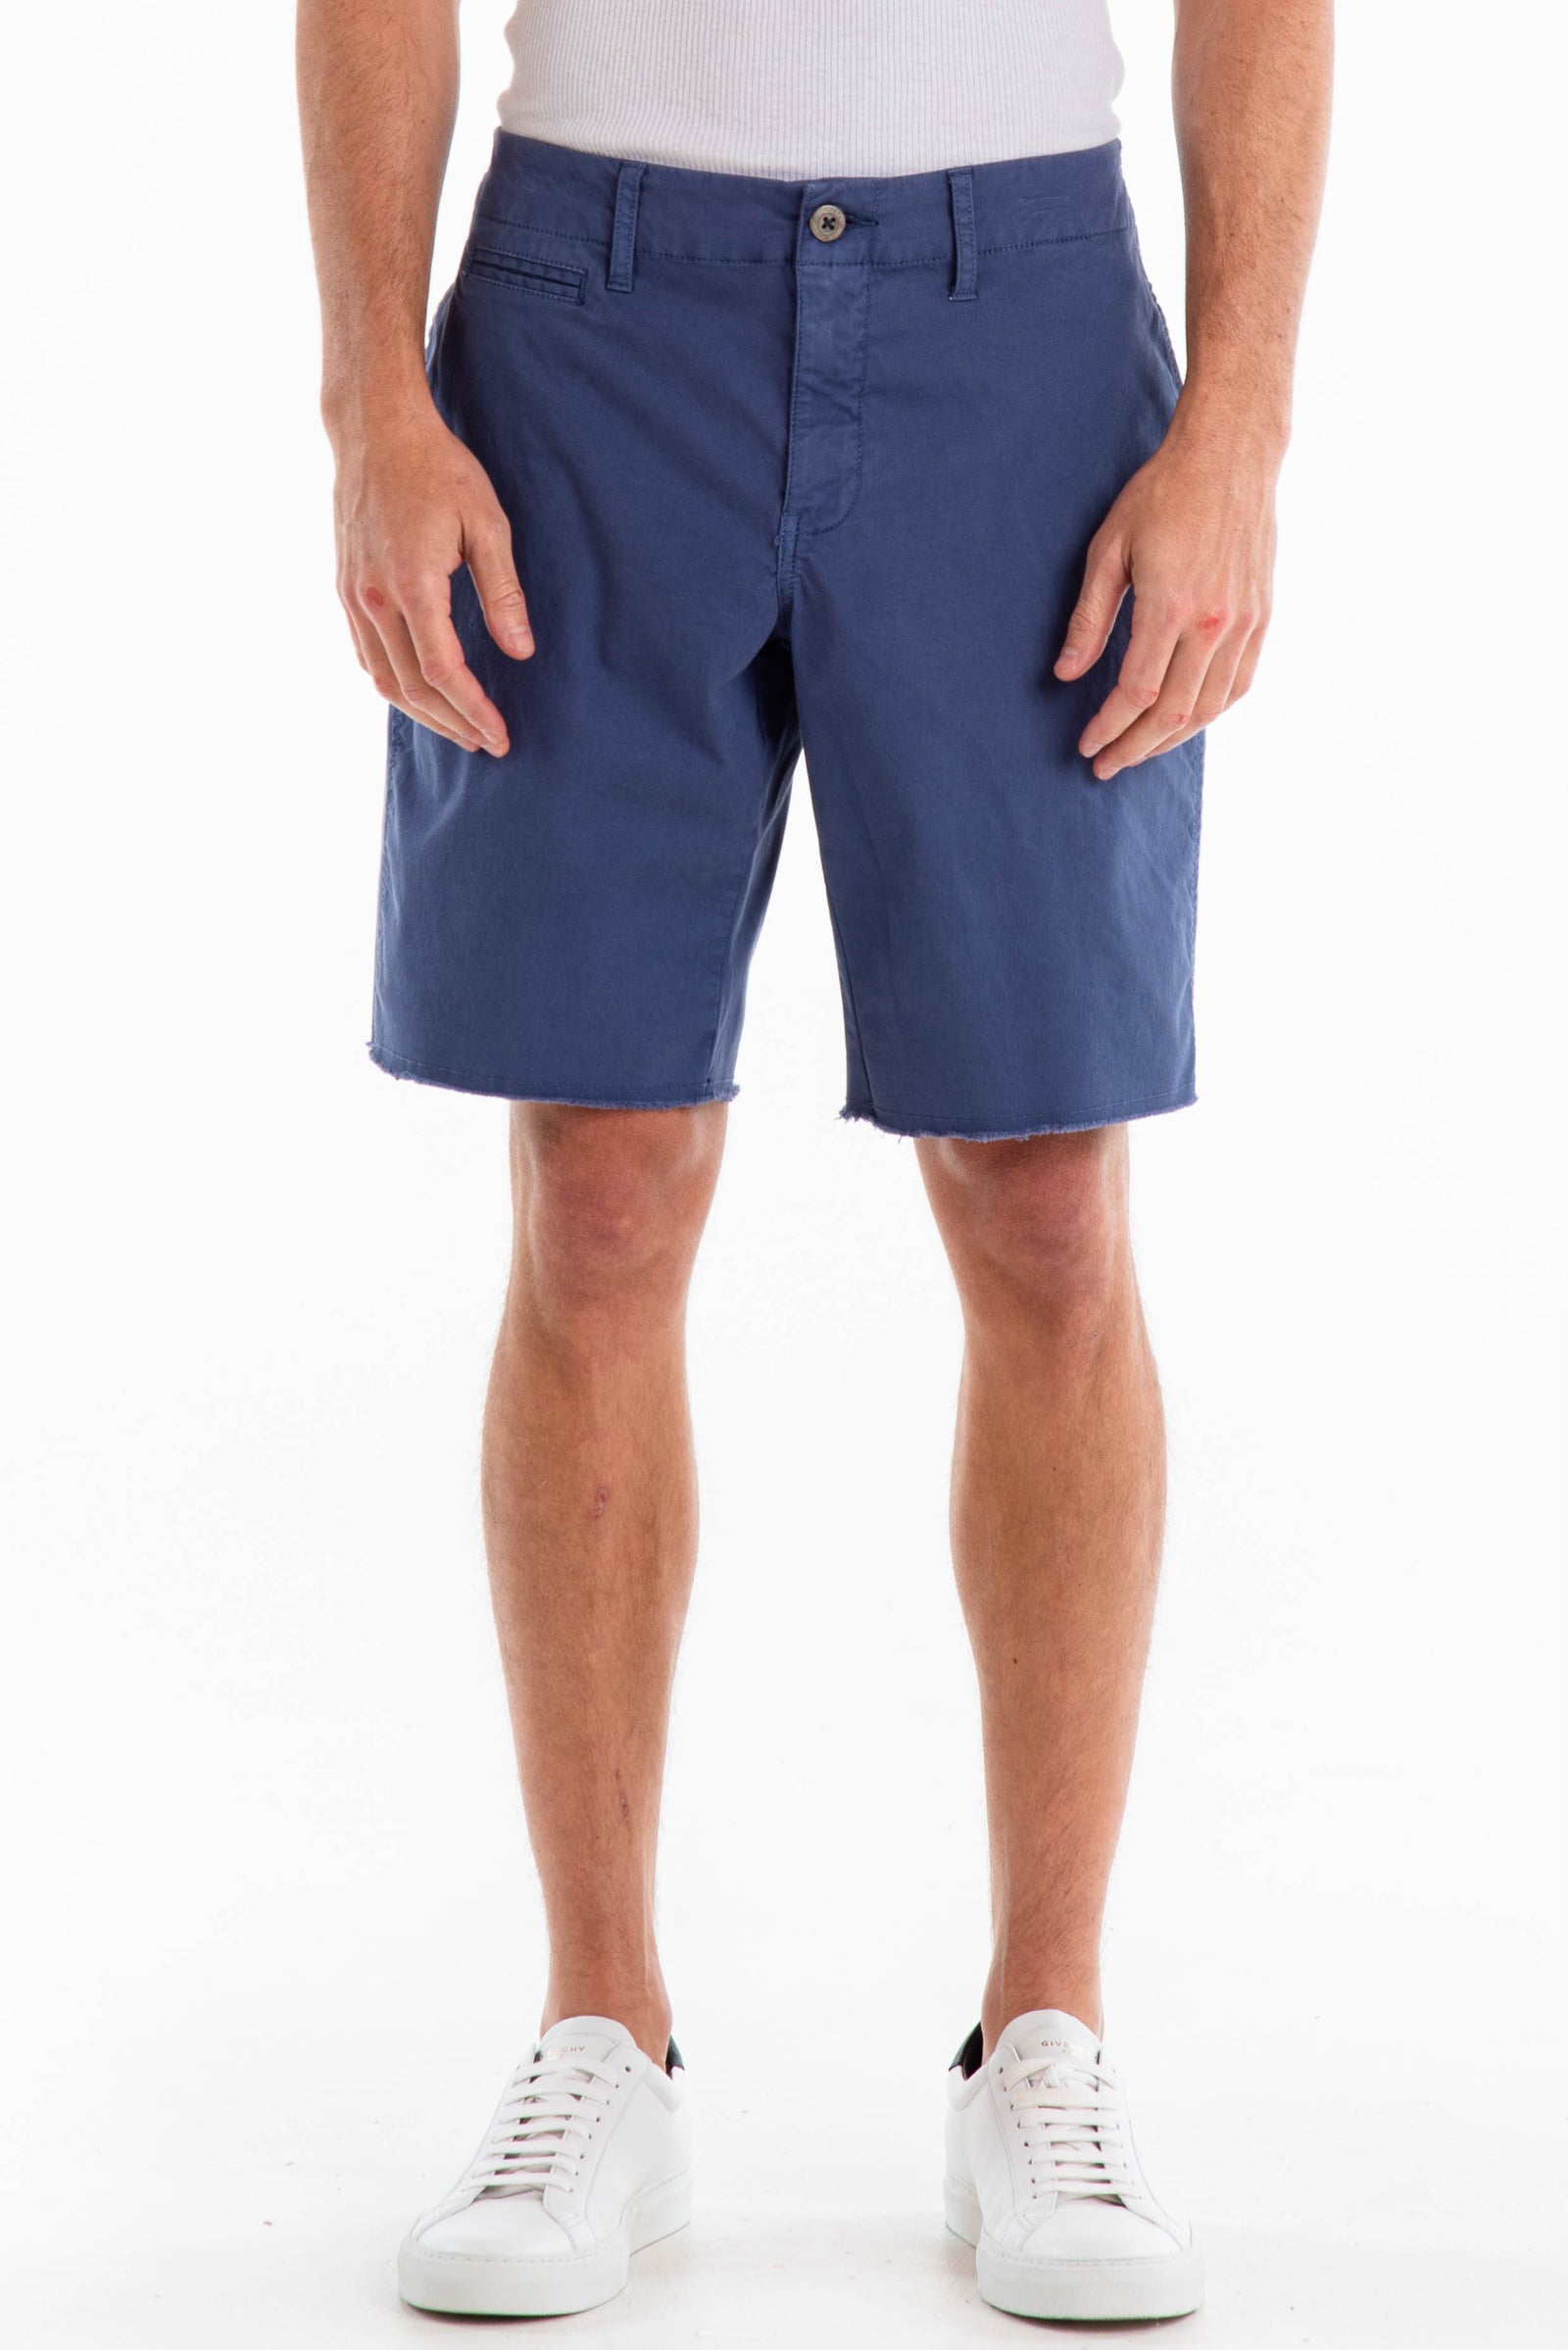 Original Paperbacks Rockland Chino Short in Indigo on Model Cropped Front View